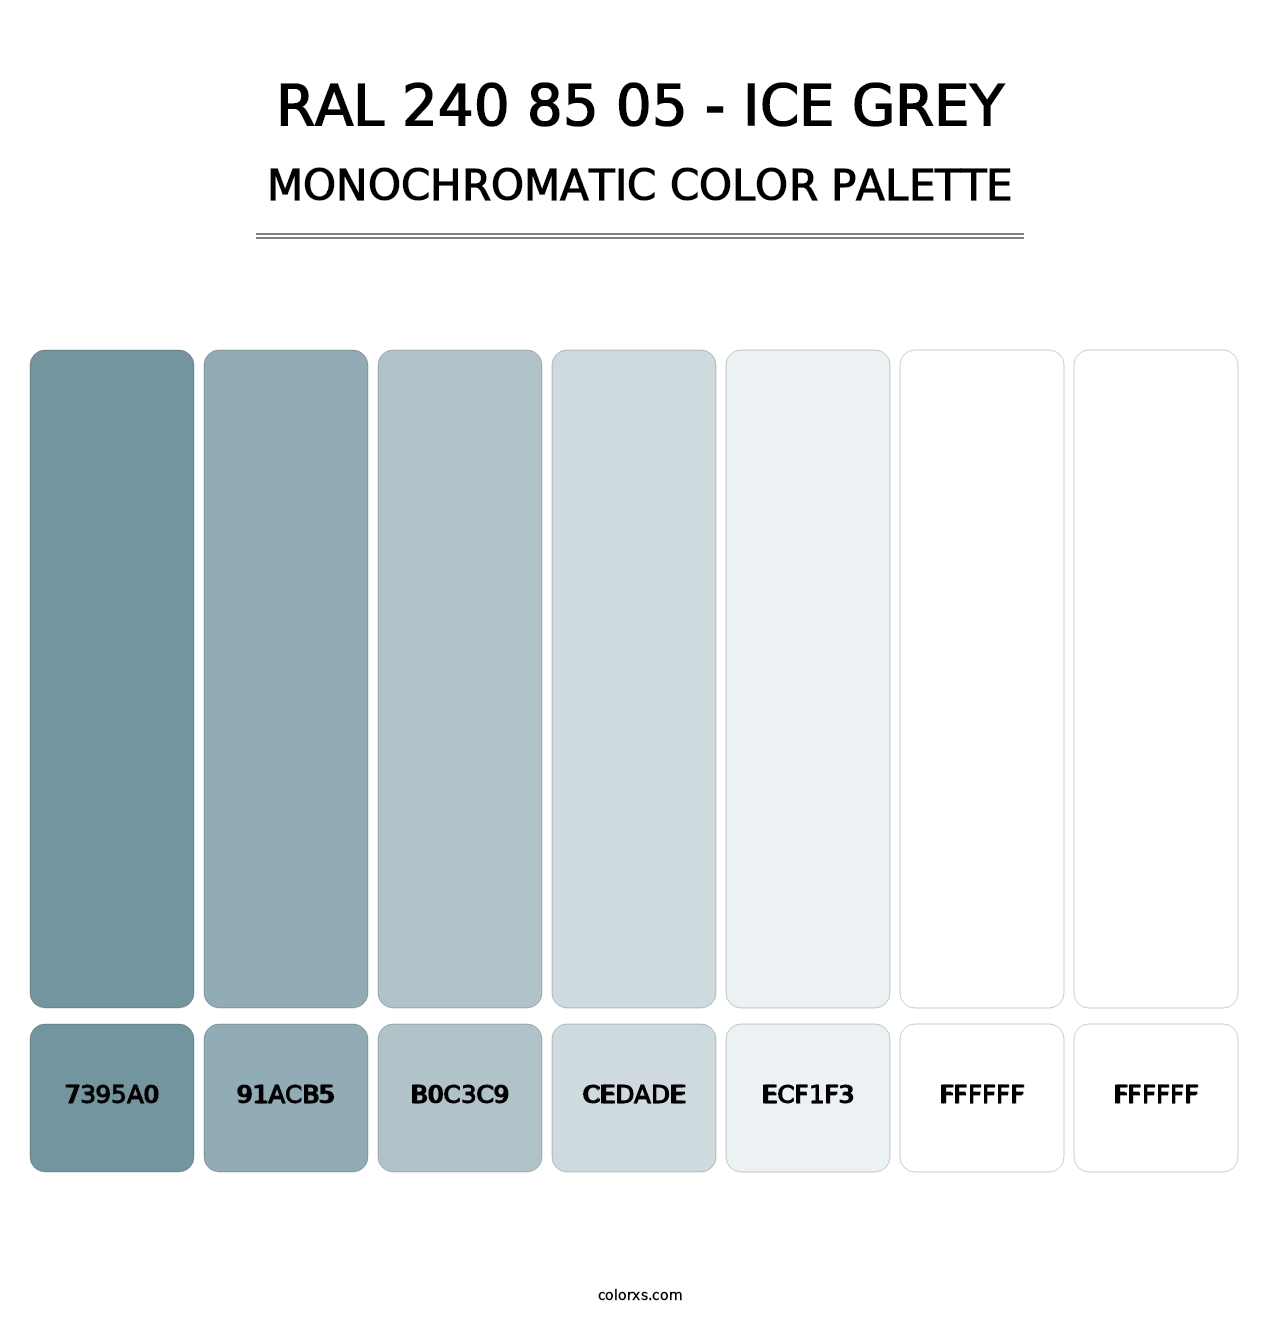 RAL 240 85 05 - Ice Grey - Monochromatic Color Palette